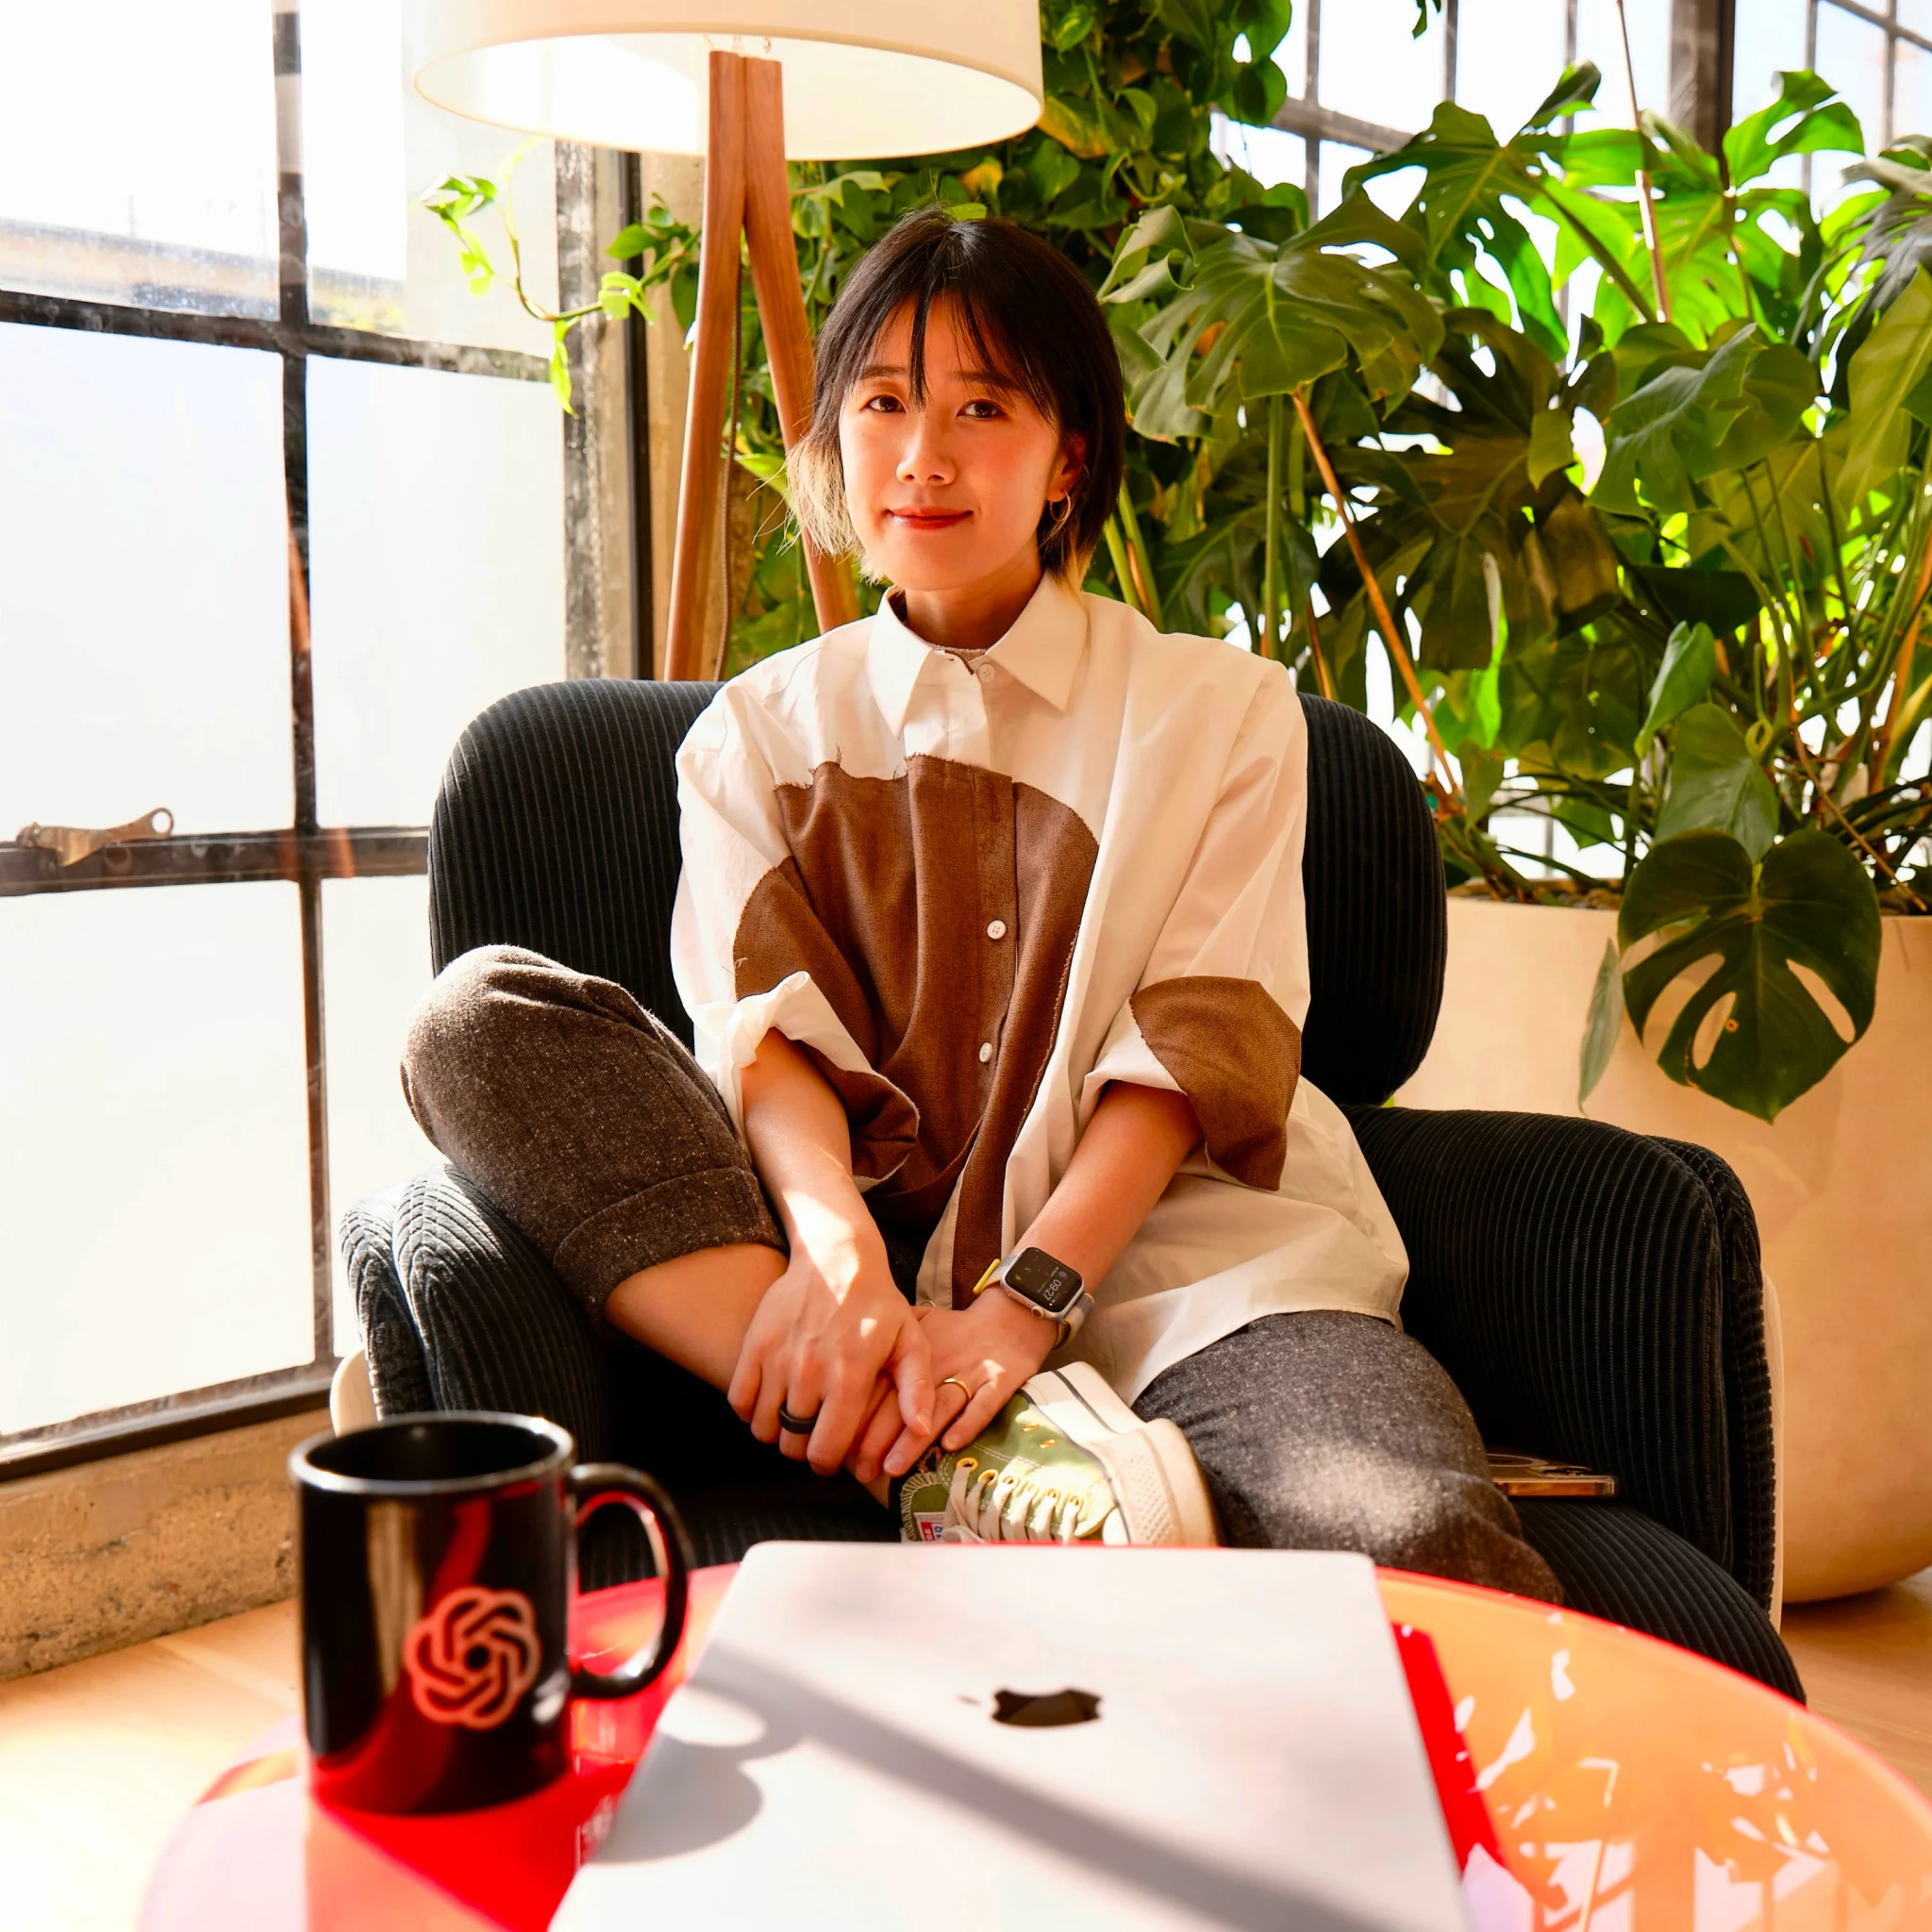 Person sitting on a couch in front of a red coffee table in a plant-filled room